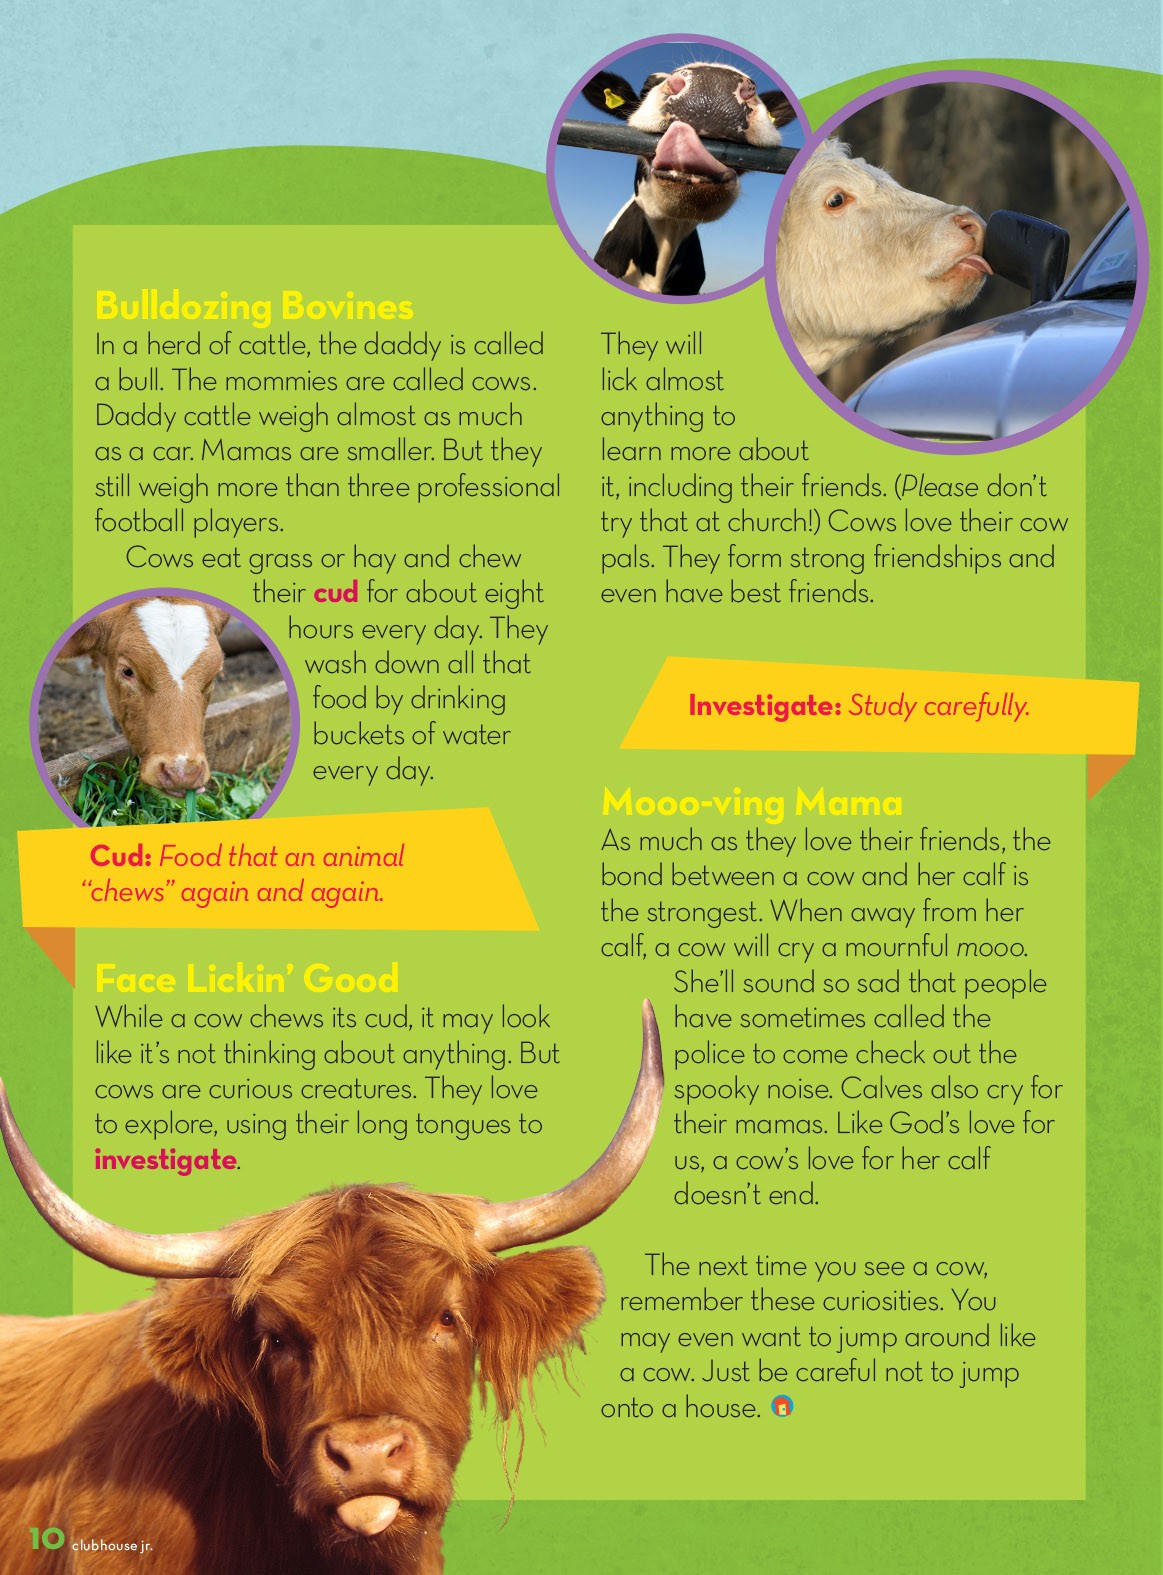 Fun facts about cows for kids "How Now, Mooo Cow?" by Jean Wilund (Clubhouse Jr Magazine)